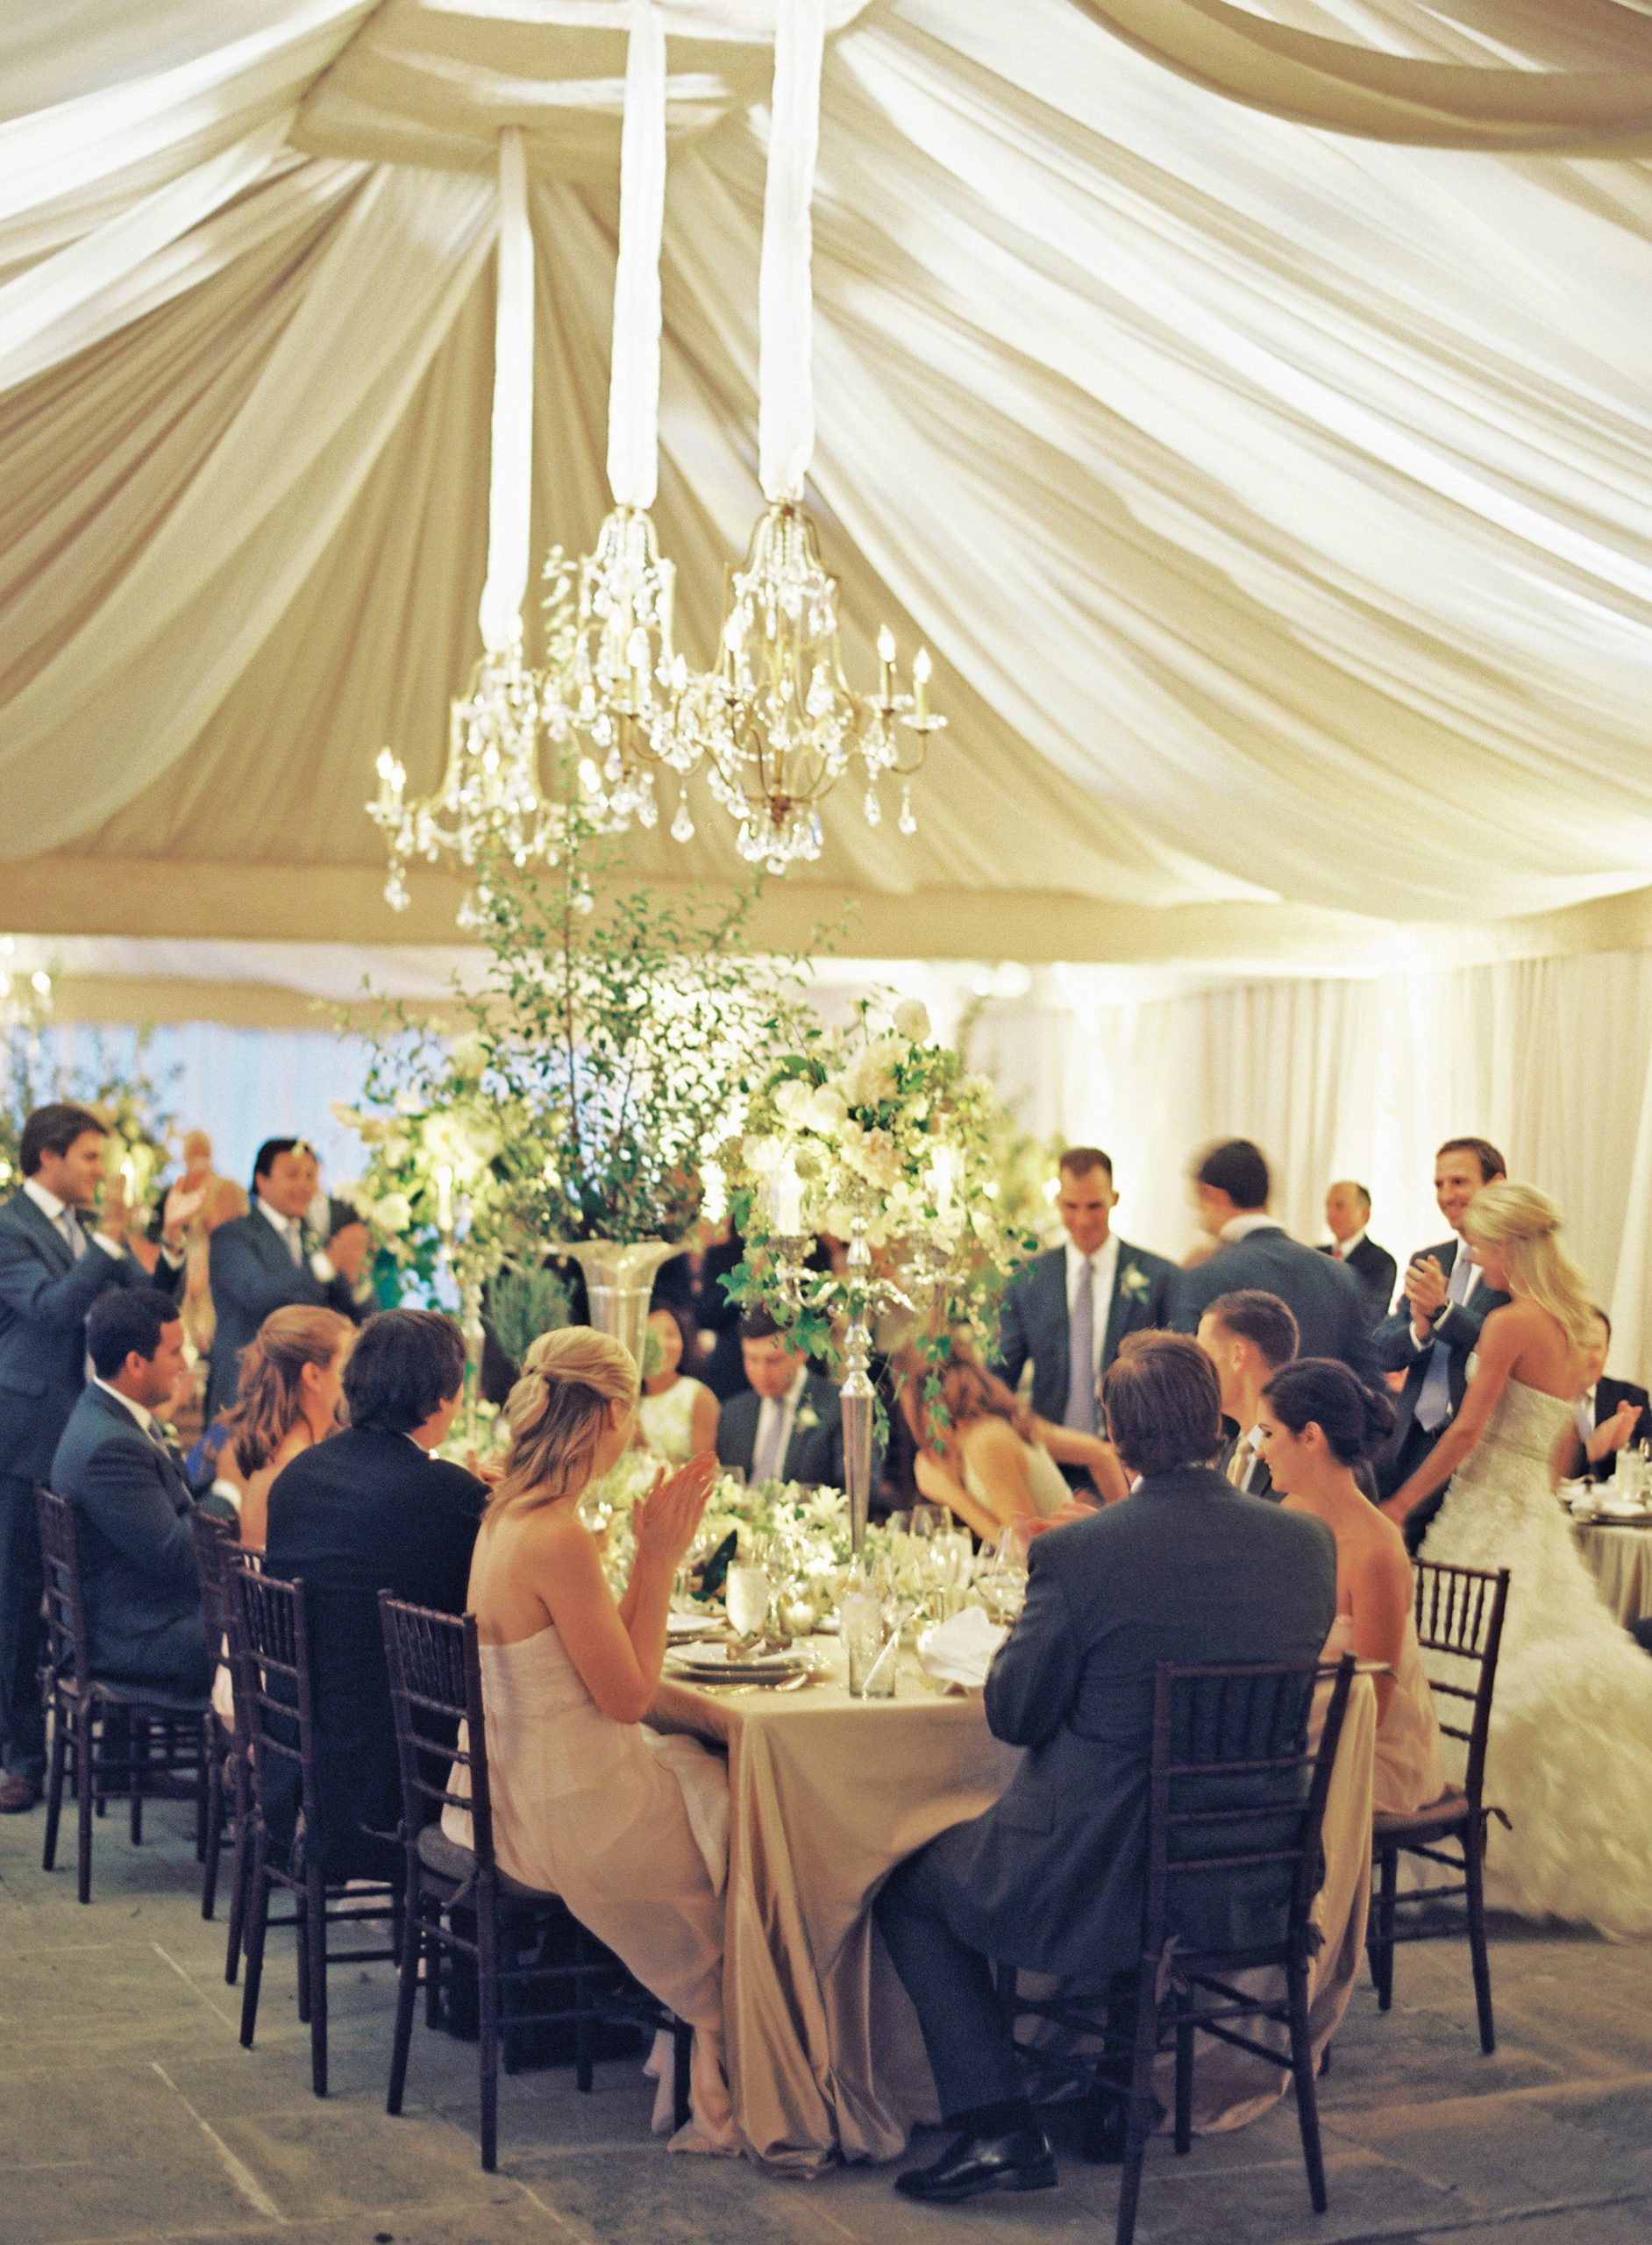 11 Things You Need to Do Before Booking Your Wedding Vendors